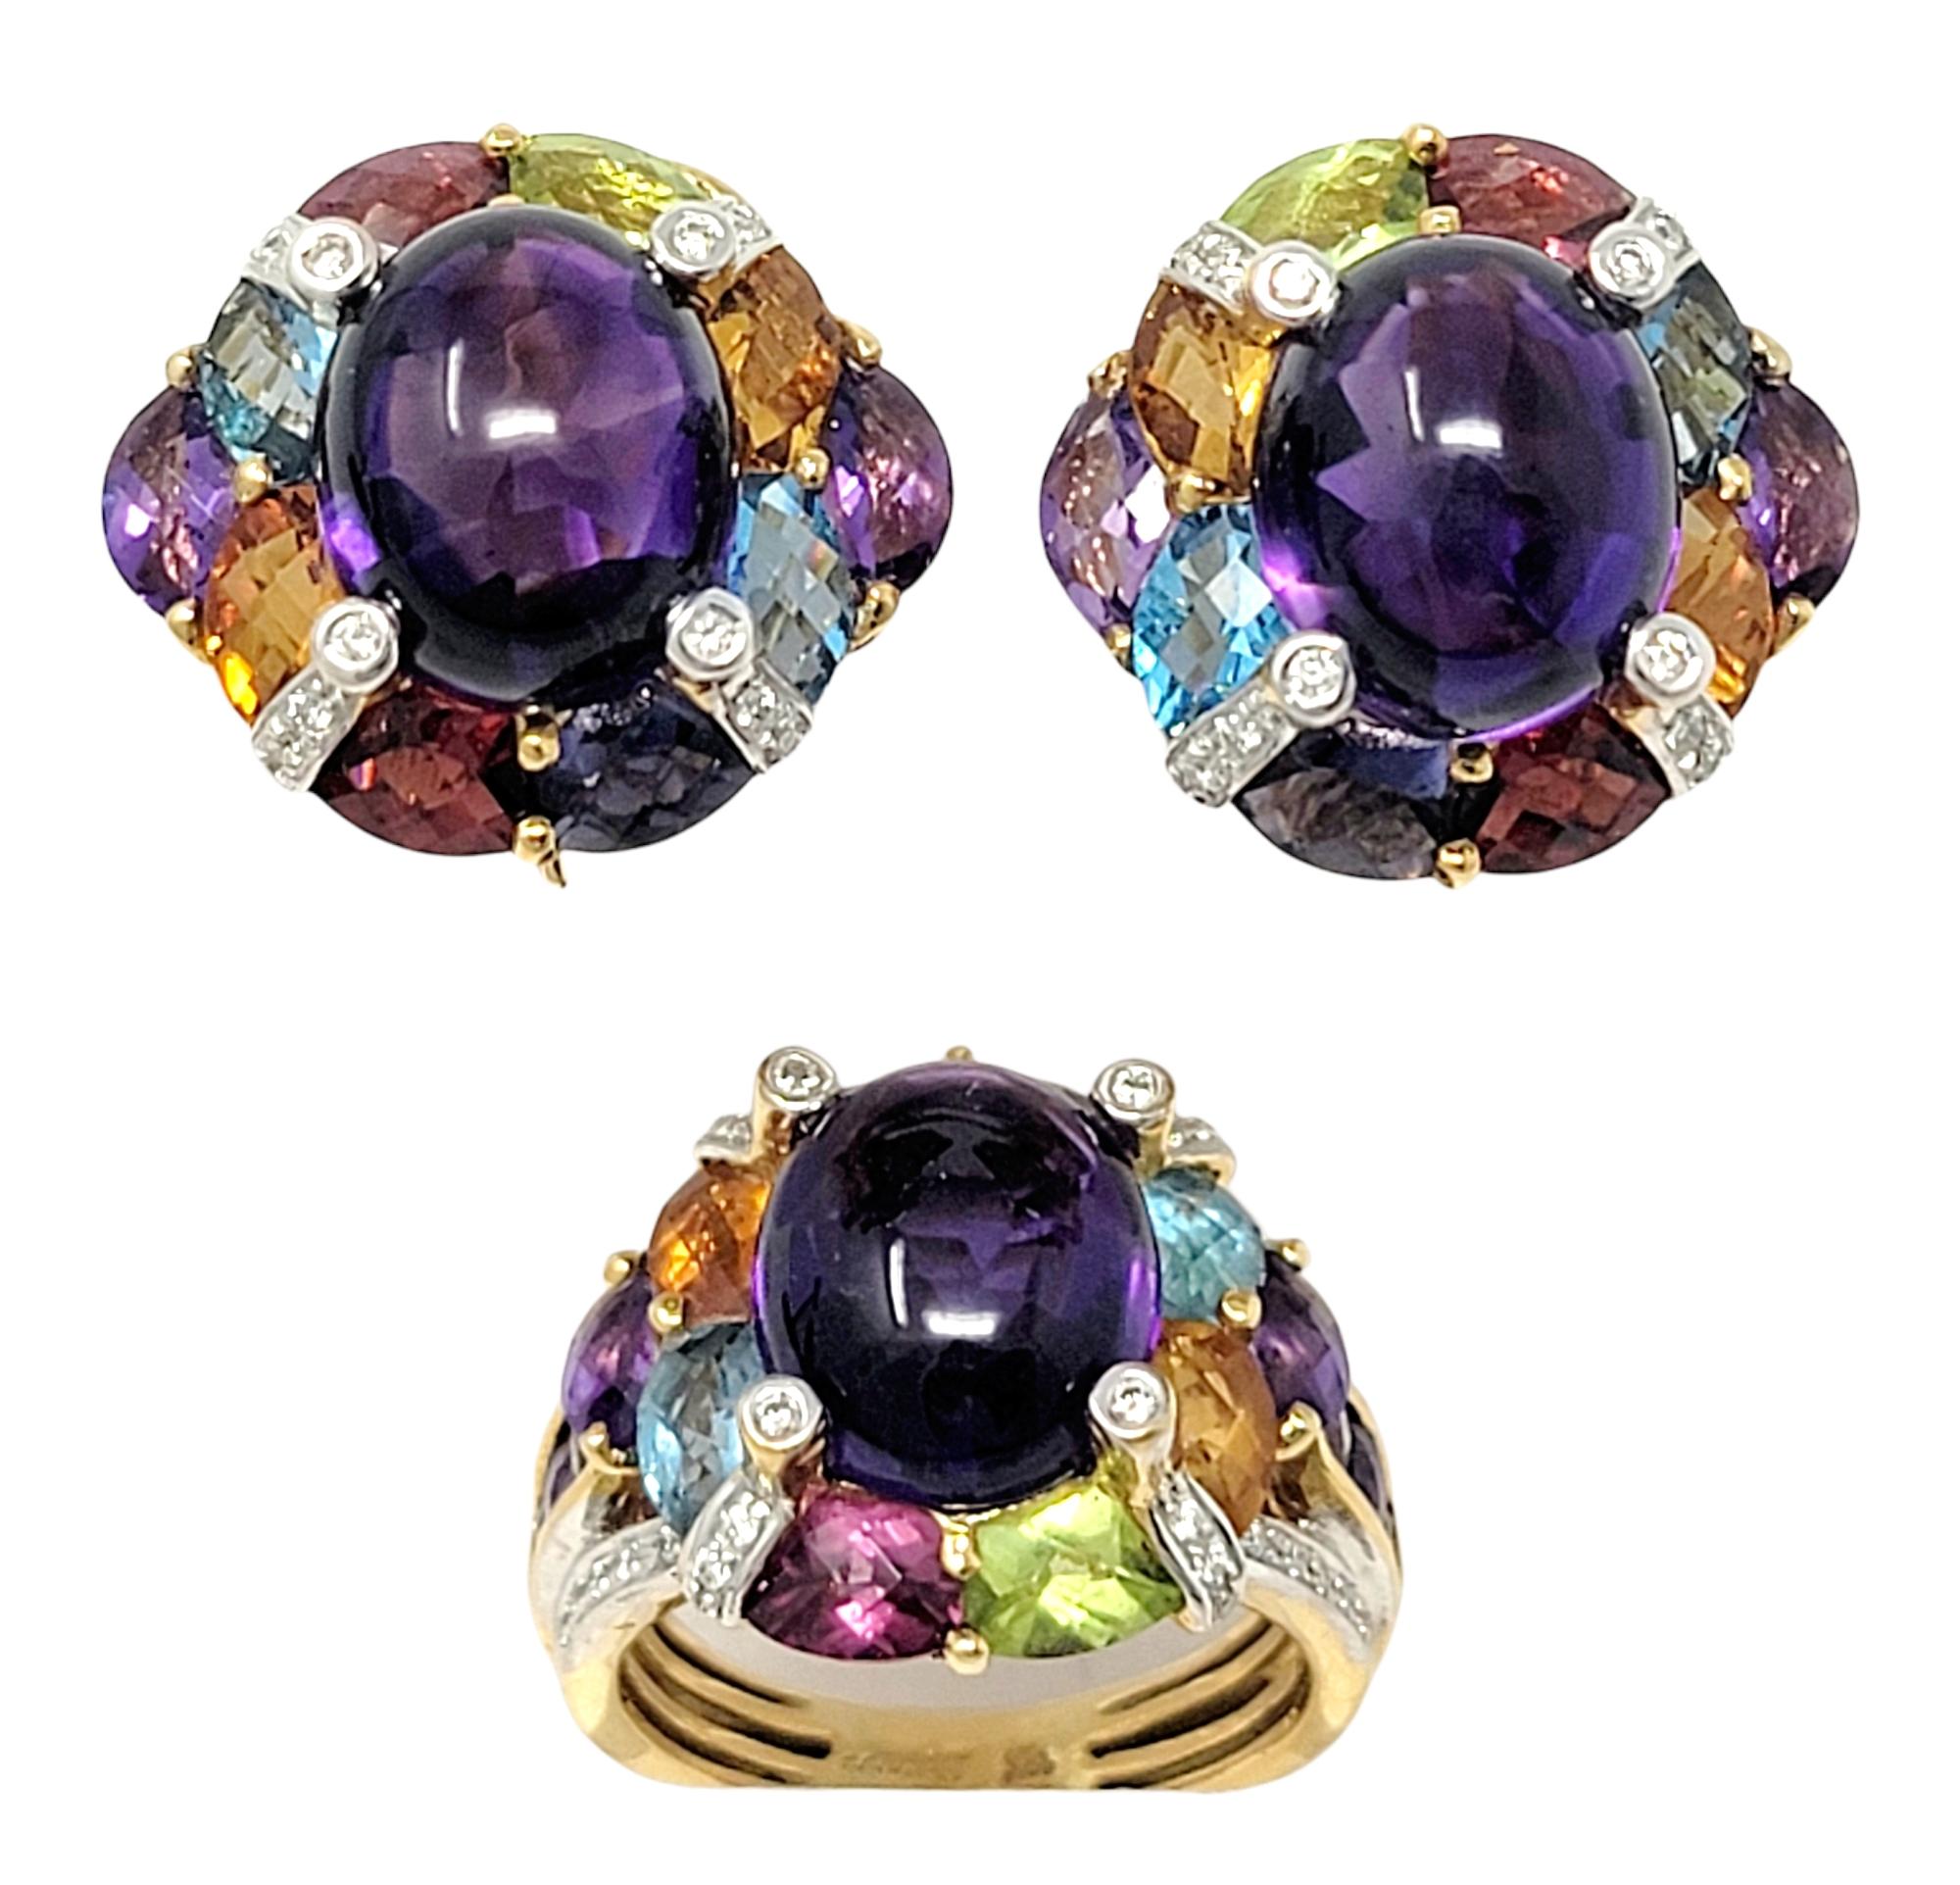 Dress up your whole look with this colorful, bold earring and ring set! Stunning vibrant gemstones fill the near identical pieces, while glittering natural diamonds add a little extra sparkle and shine. At the center of both the ring and earrings